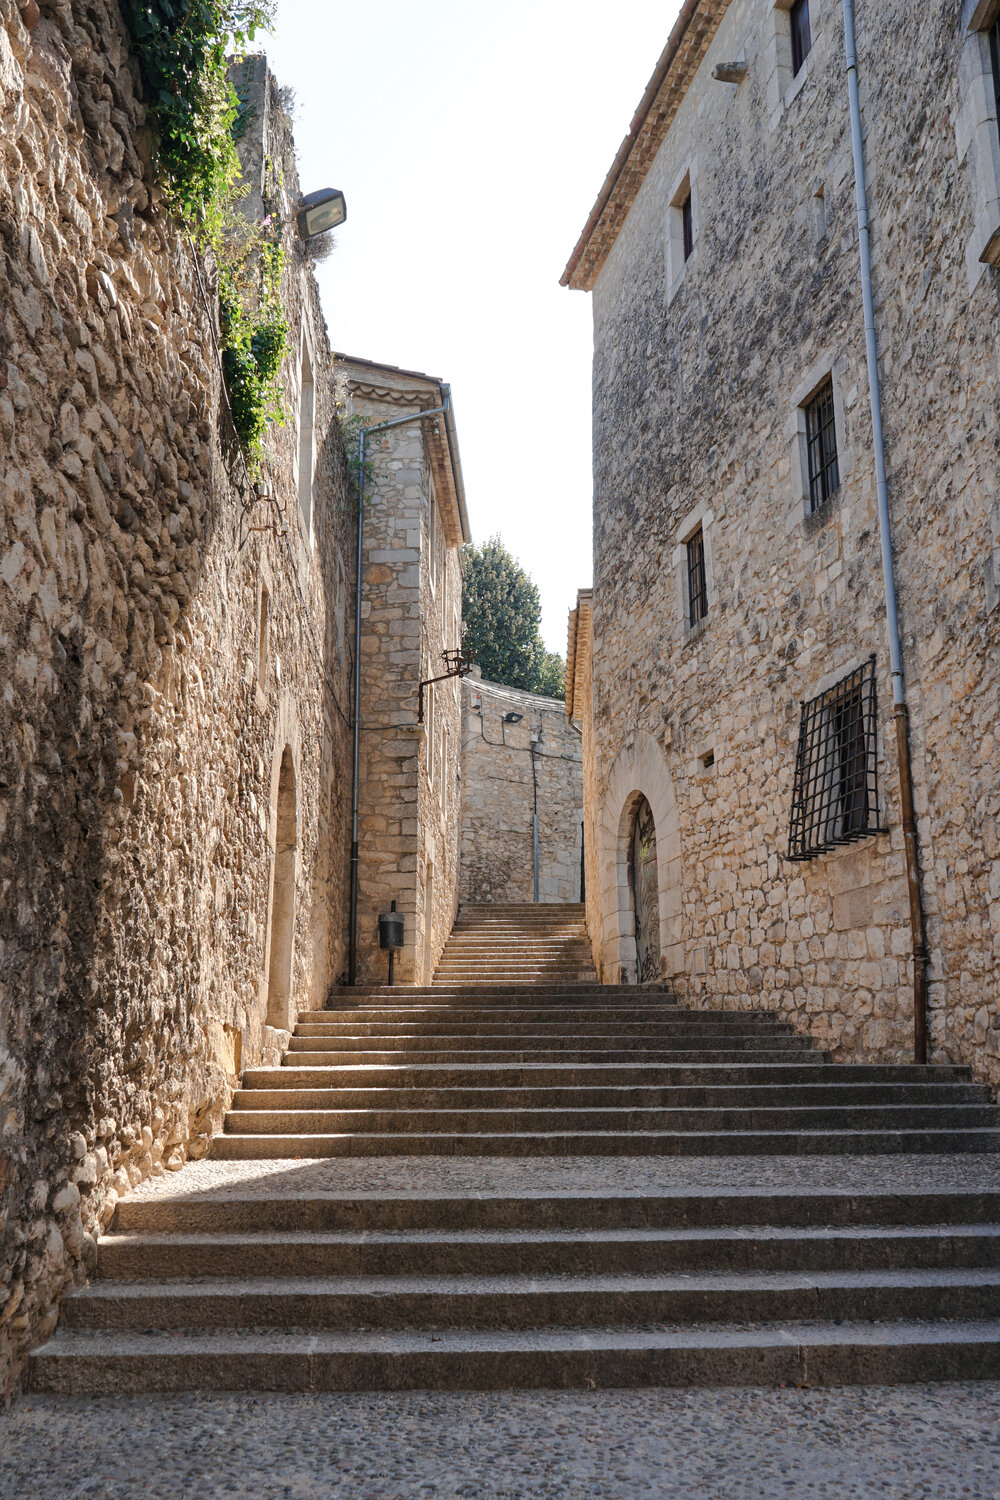  Only 1 hour away from Barcelona by train, take a day trip to the medieval town of Girona – otherwise known as Braavos, Oldtown, and King's Landing from Game of Thrones 